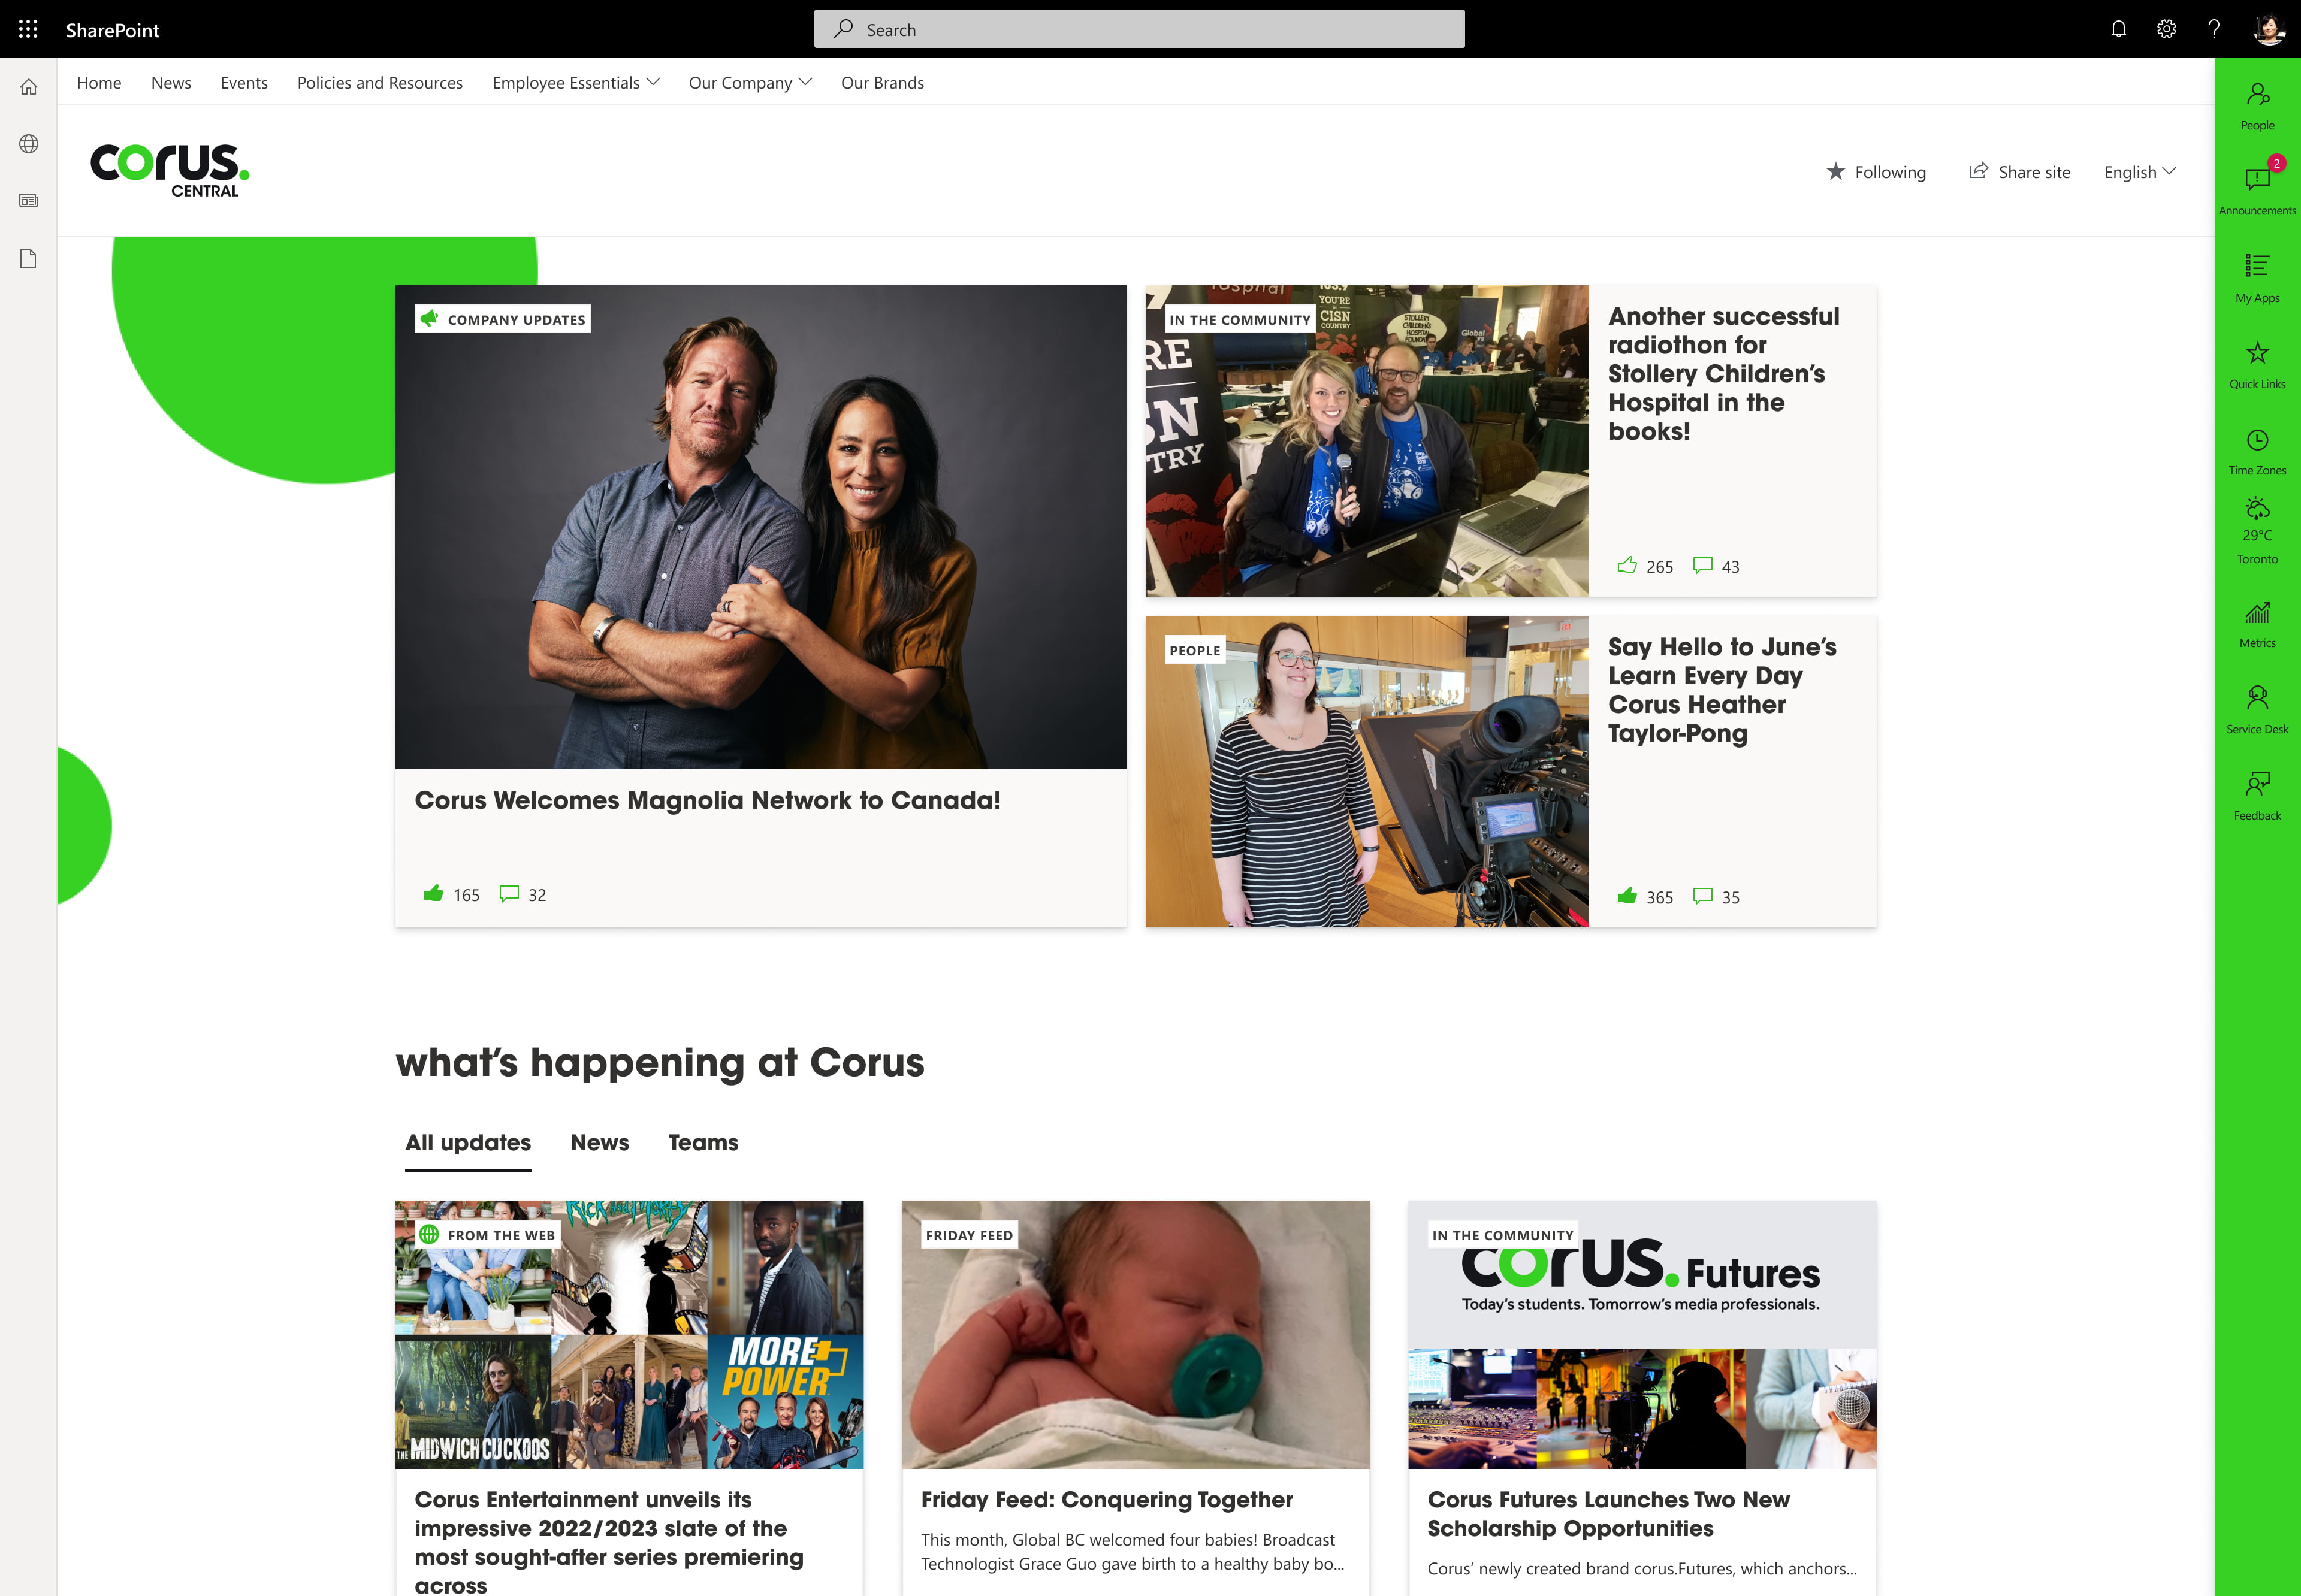 Screenshot of the home page of Corus's intranet, built on GO, featuring the news roll-up.